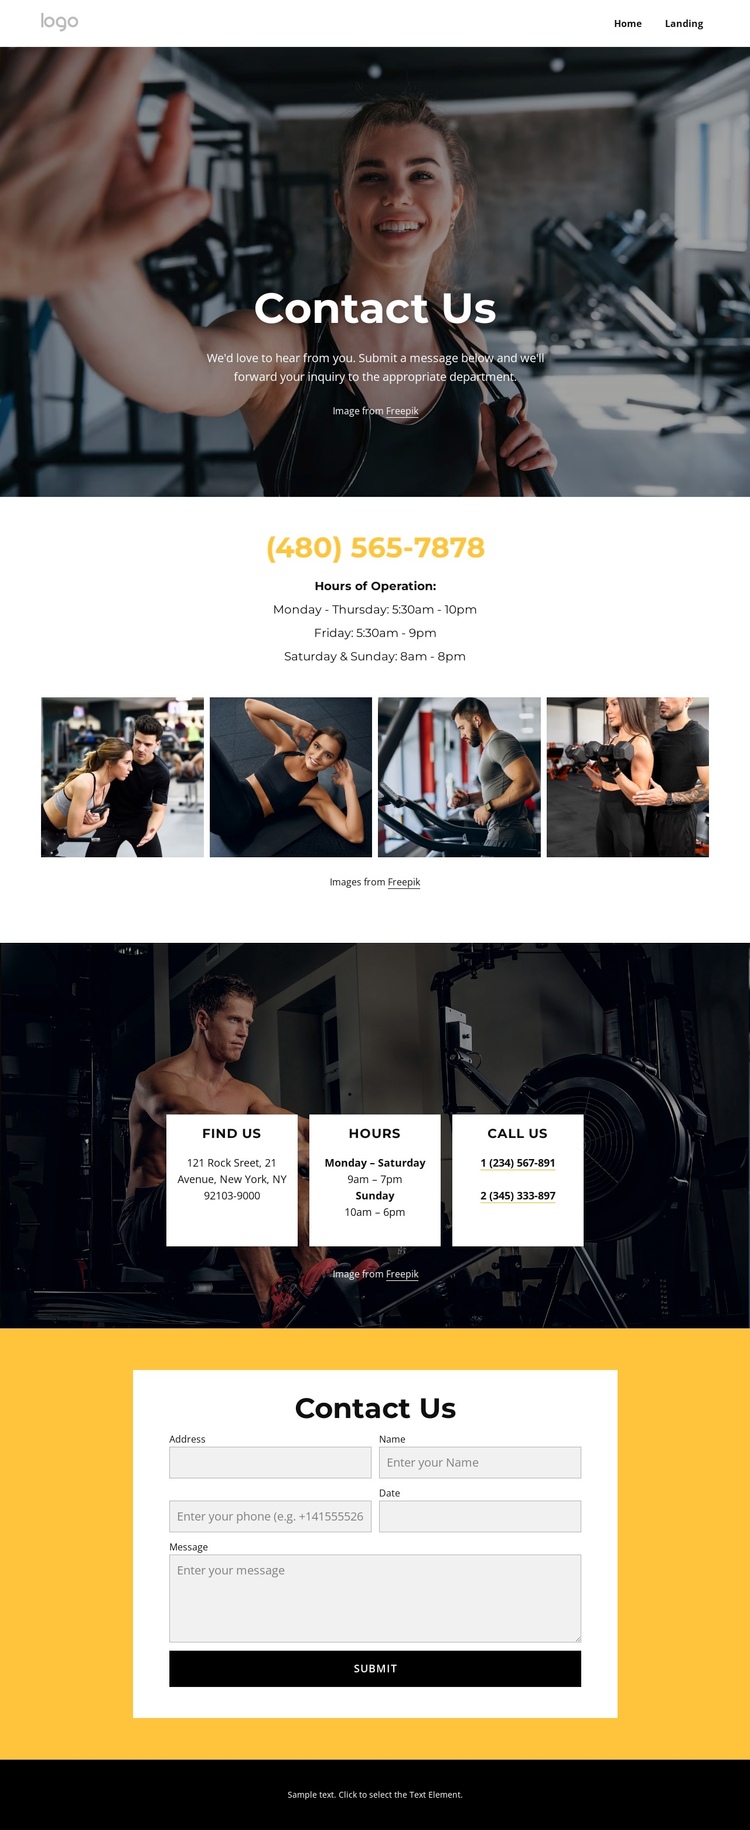 Personal training, group classes Website Builder Software